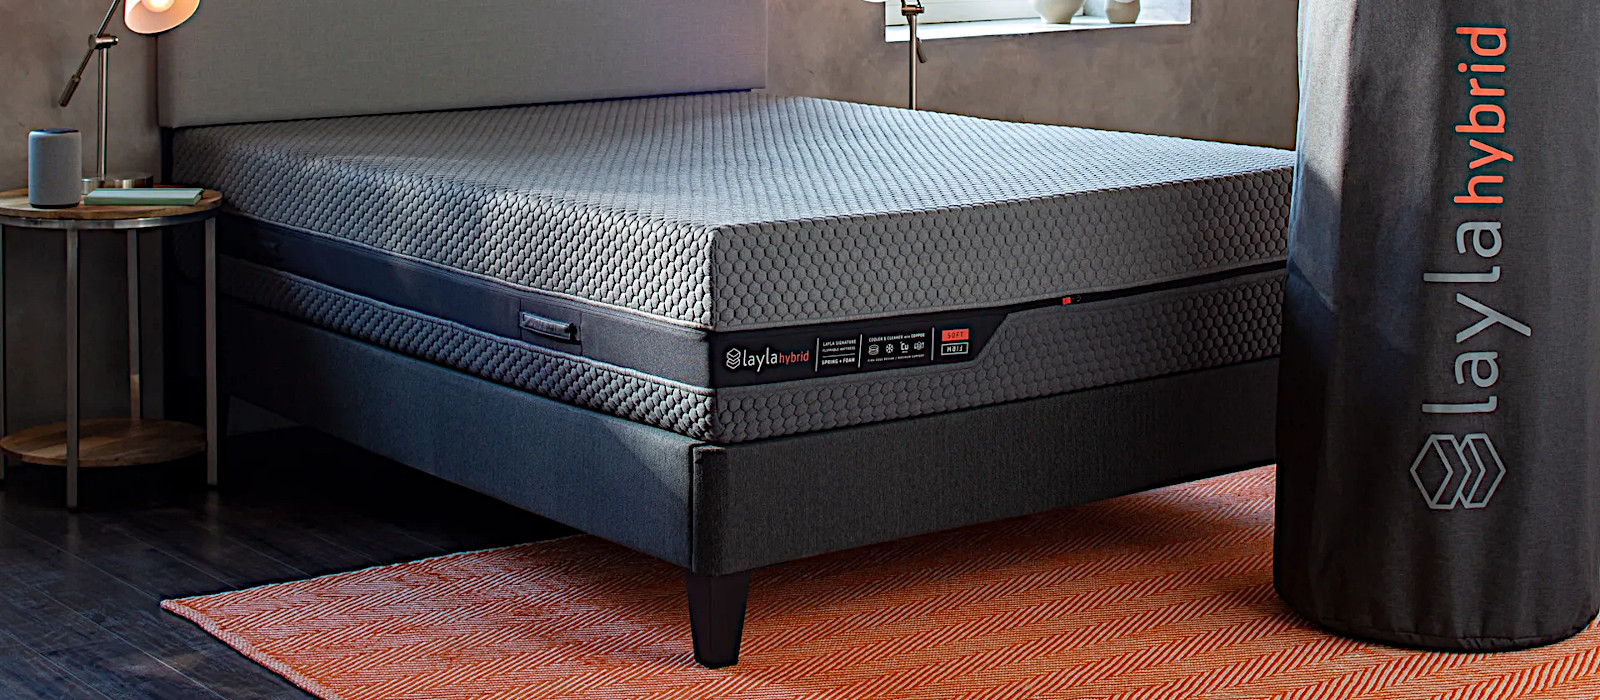 Cheap copper infused flippable hybrid mattress